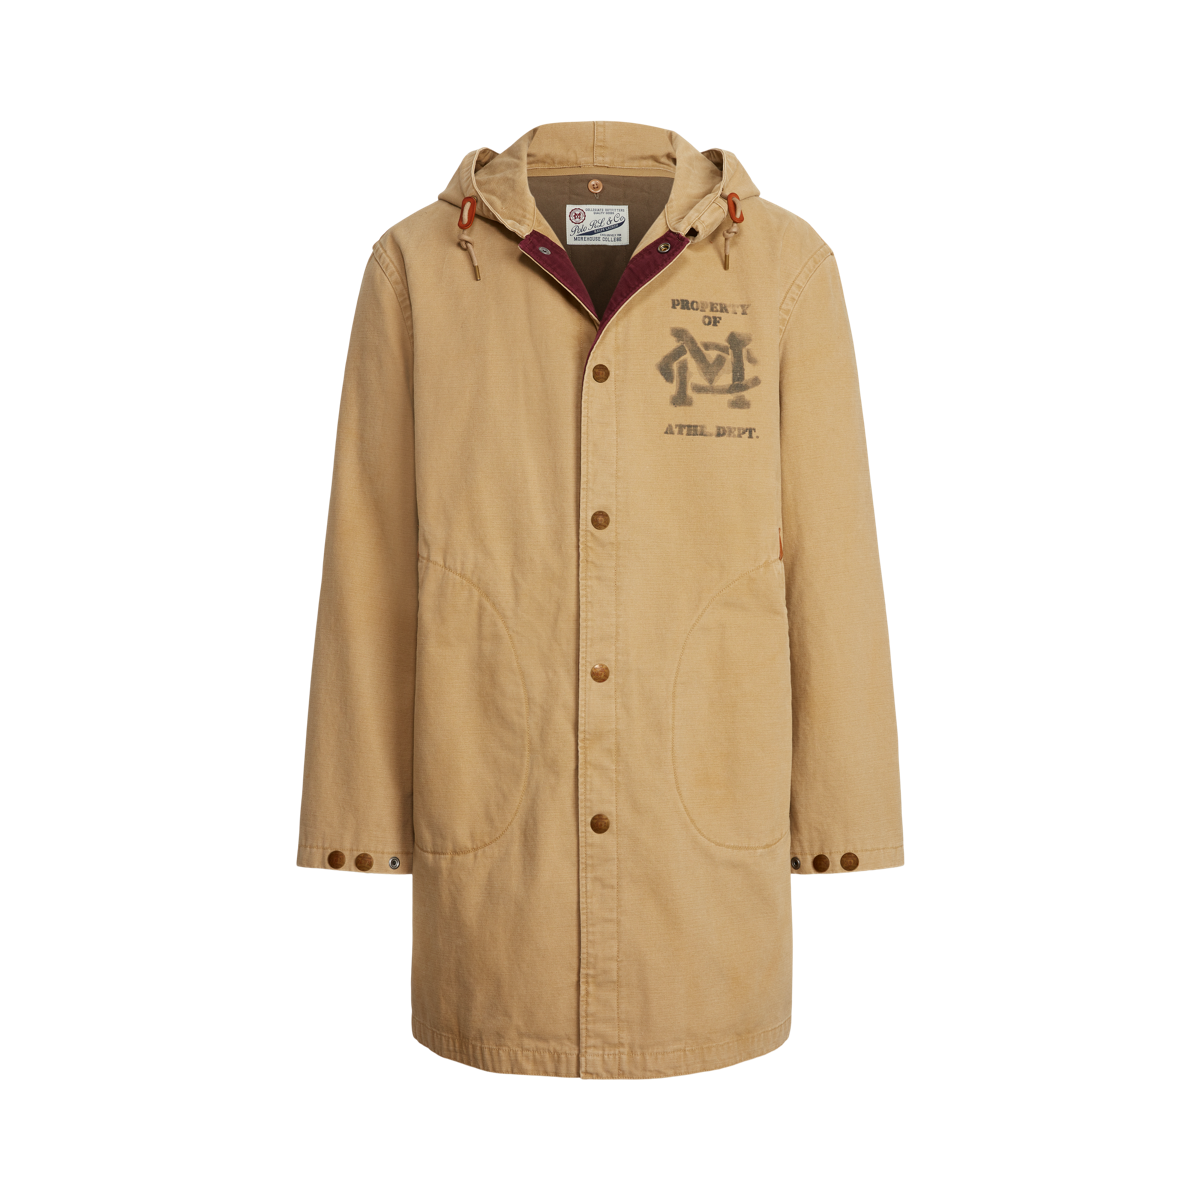 The Morehouse Collection Jacket